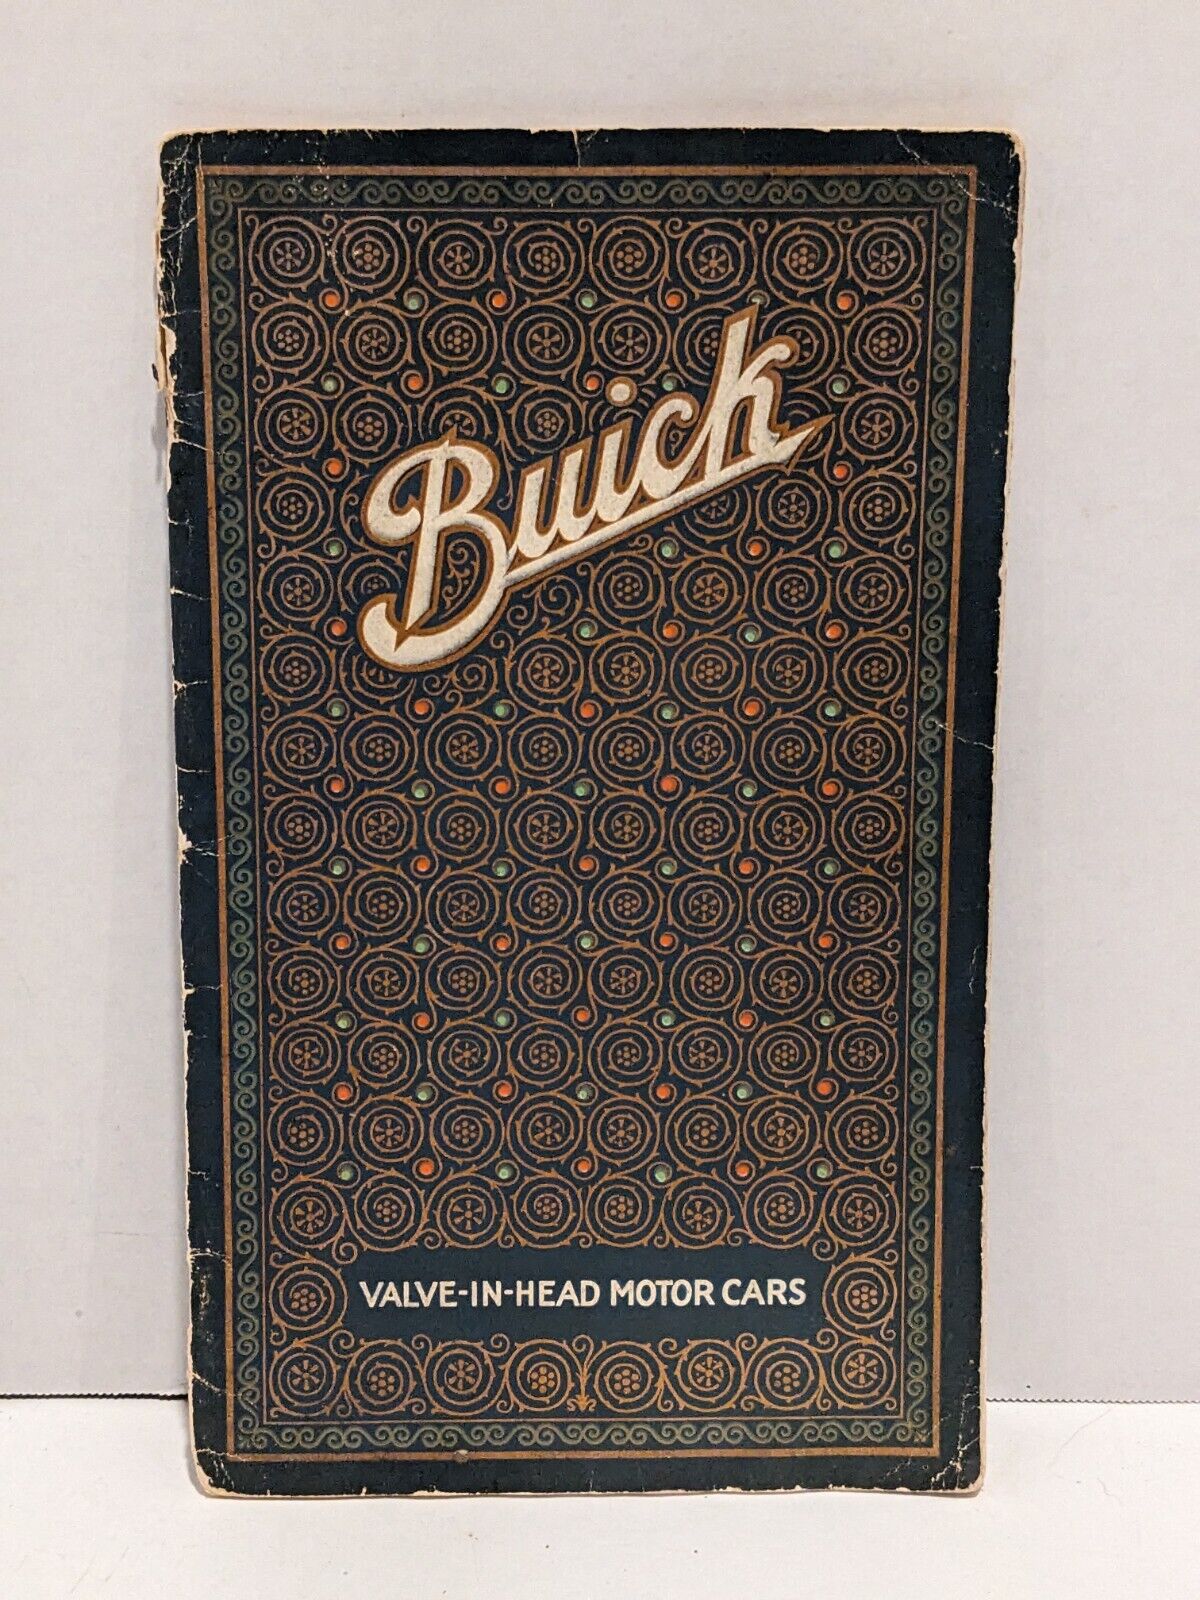 RARE VINTAGE  1918 BUICK Valve-In-Head Motor Car Catalog Booklet ILLUSTRATED